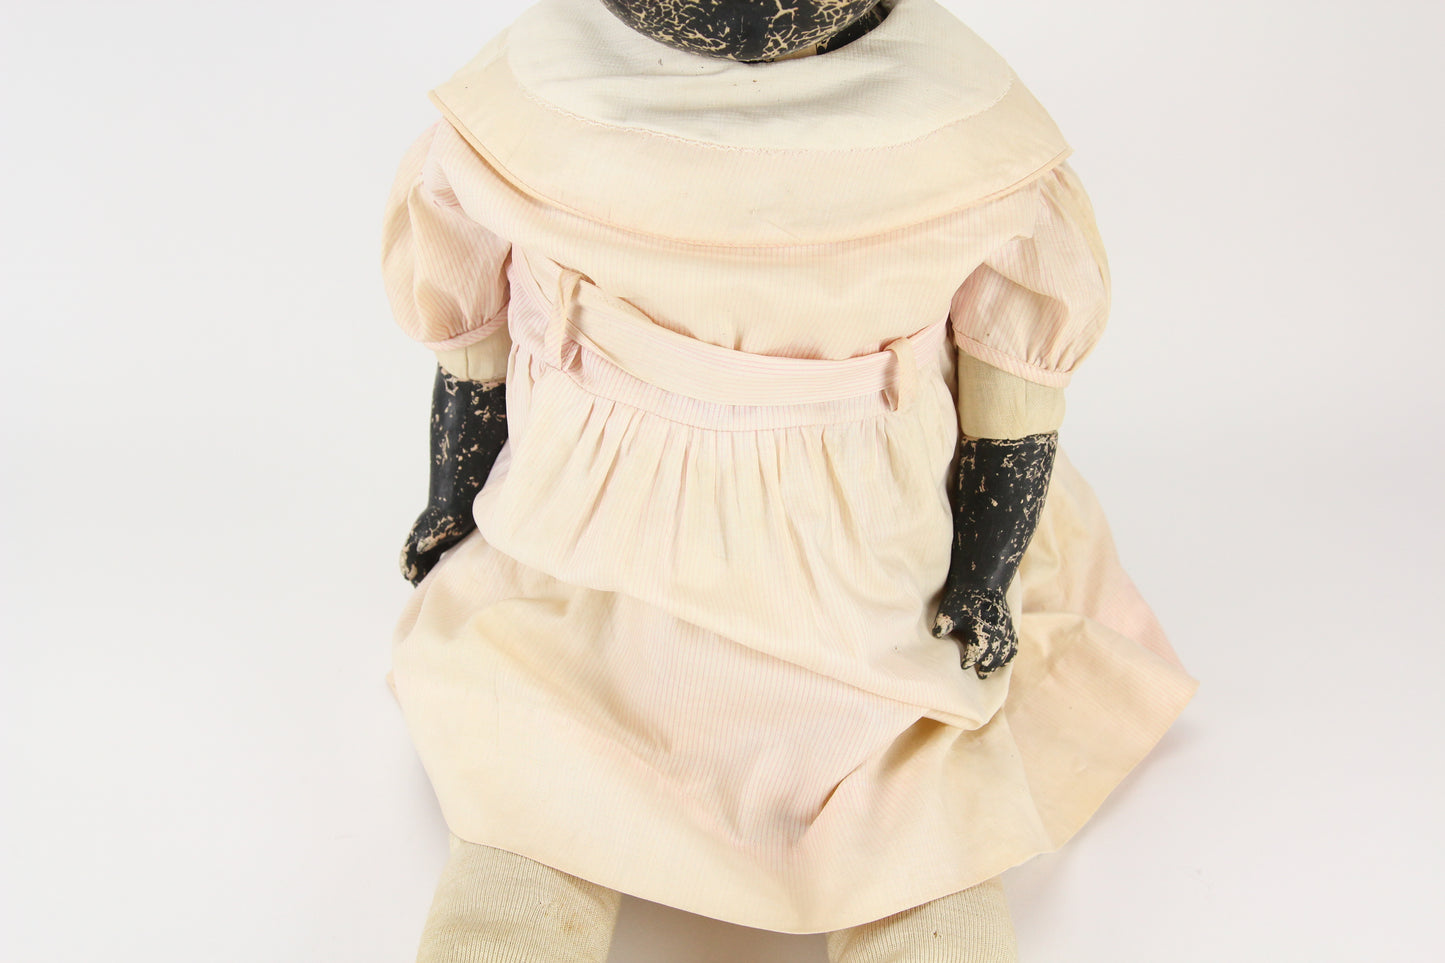 Antique Composition Black Baby Doll with Cloth Body and Vanta Clothes, 28"